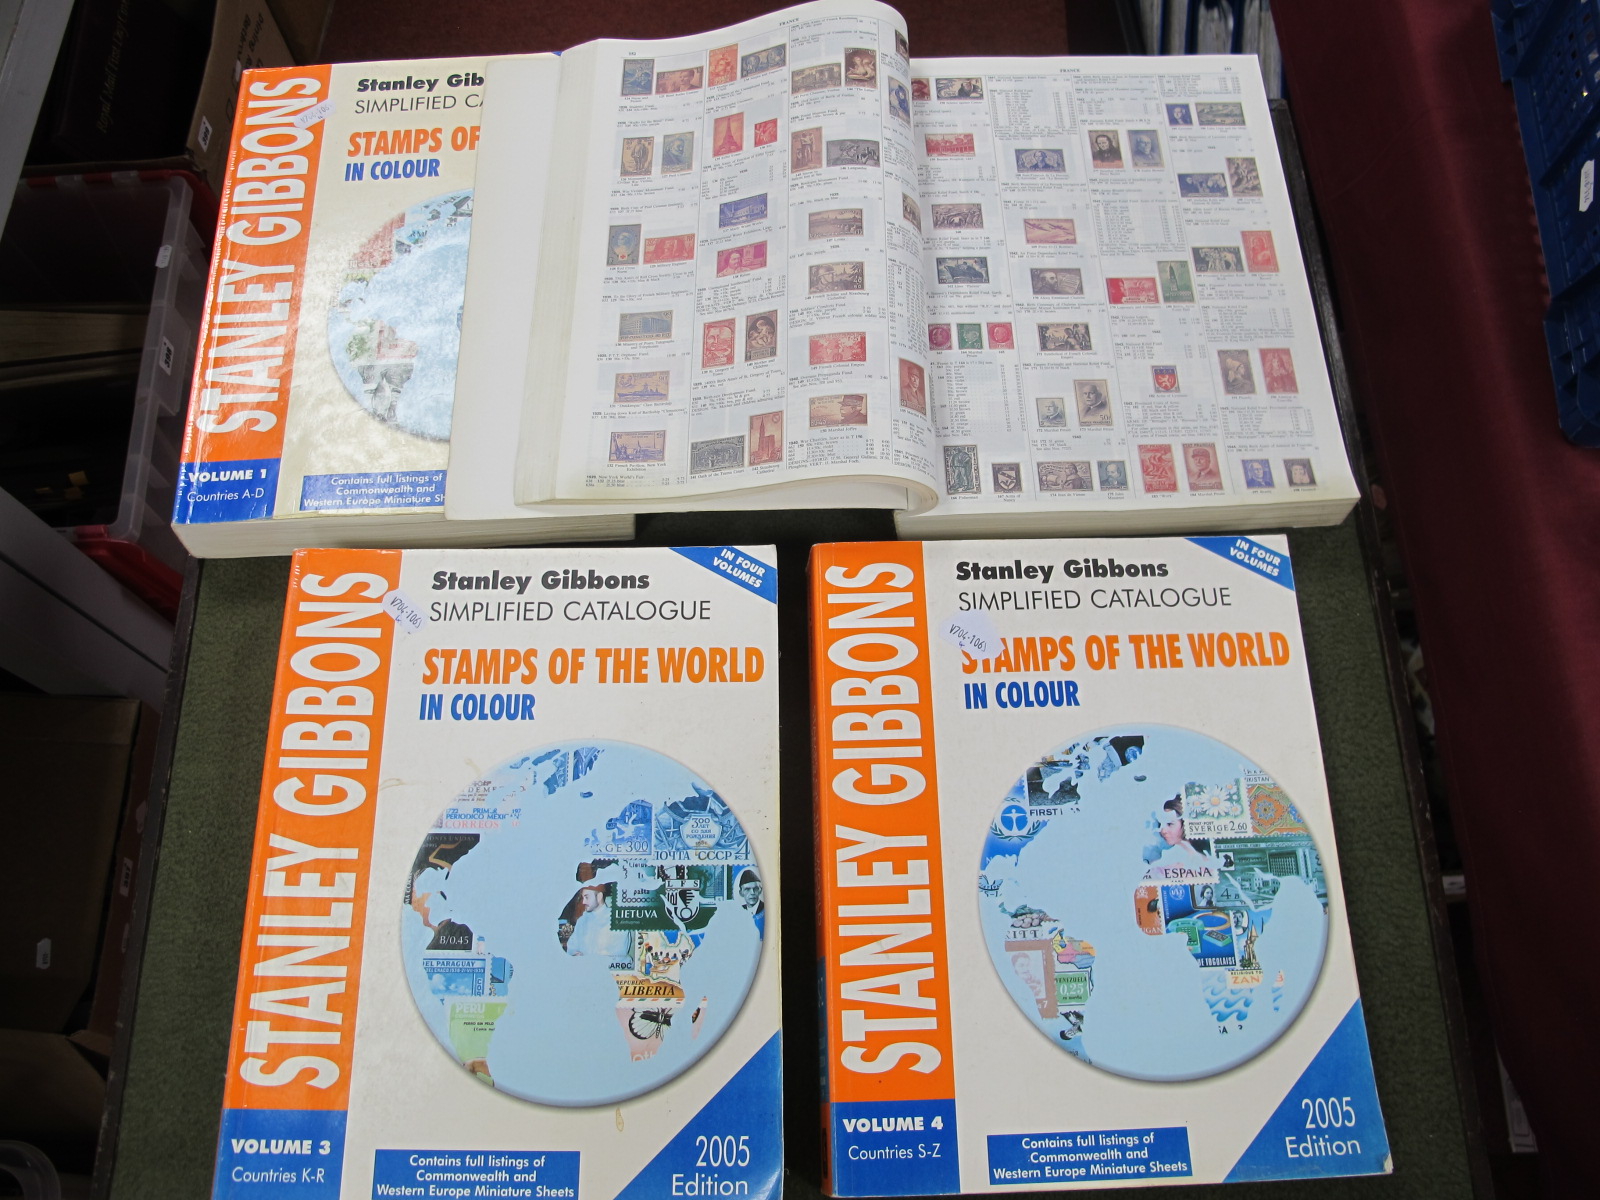 Four Volume Set of S.G 'Stamps of The World' Catalogue, 2005 Edition.